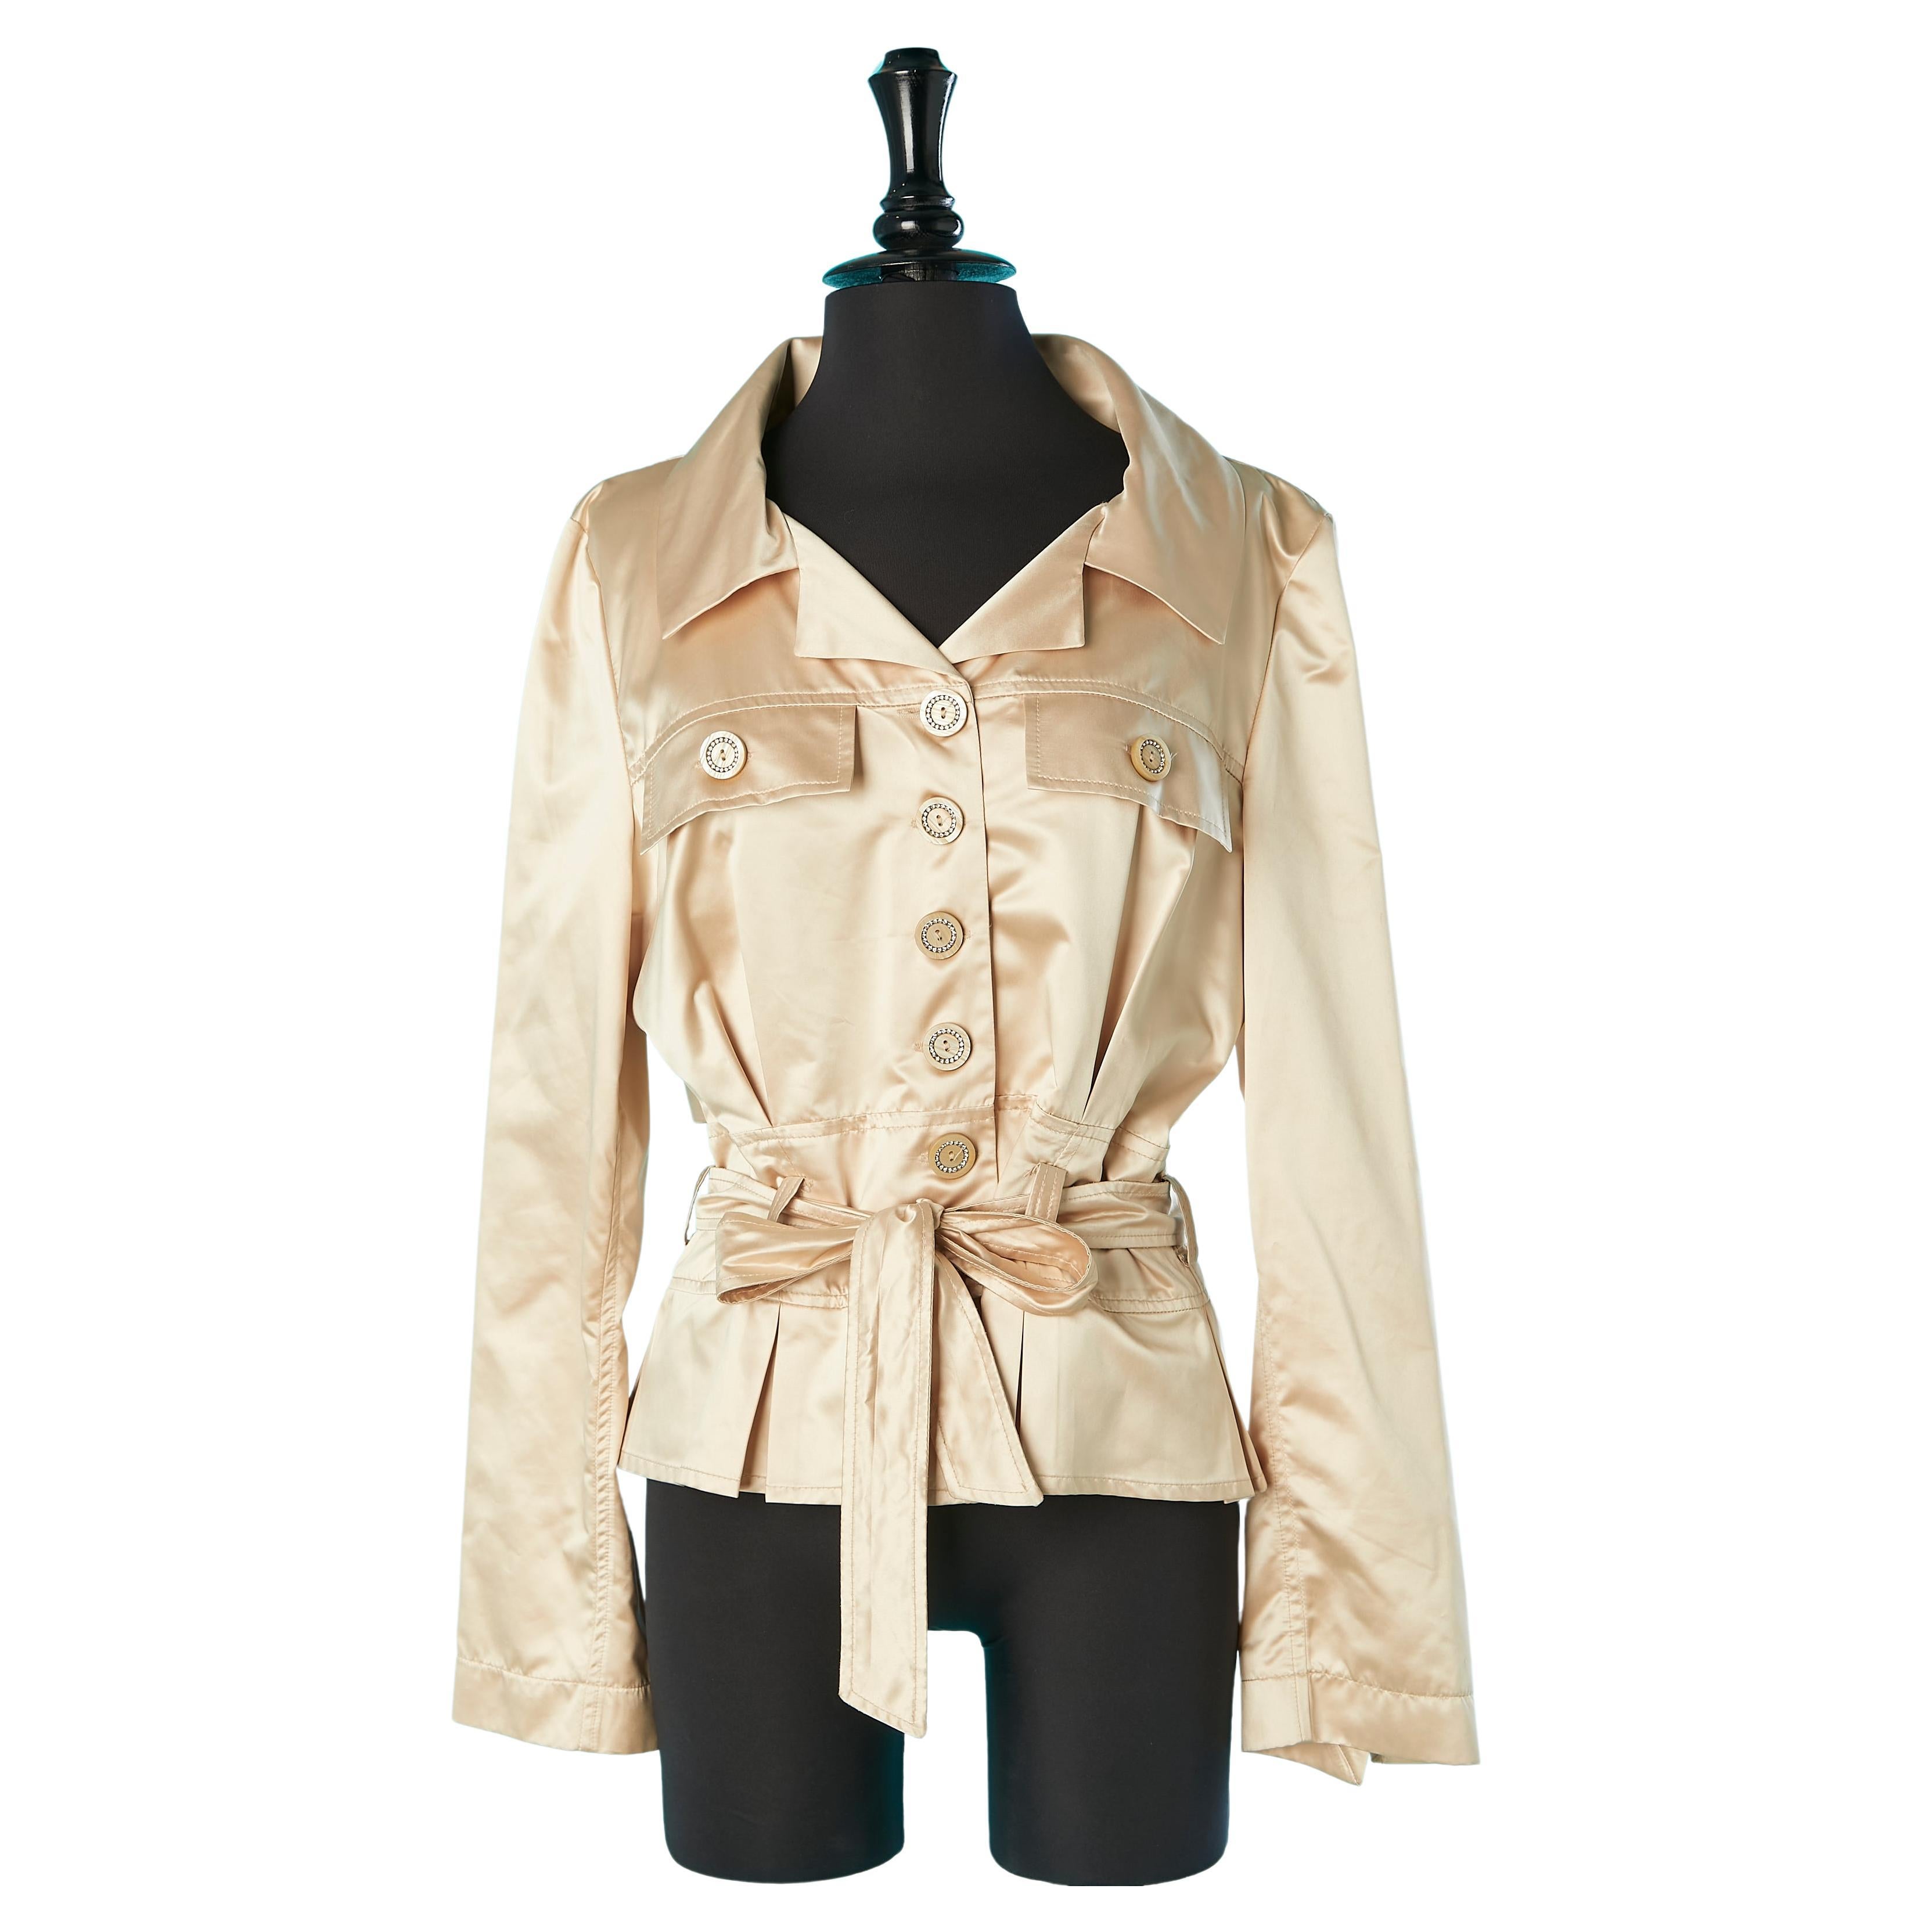 Champagne satin jacket with belt and rhinestone buttons JIKI Monté-Carlo  For Sale